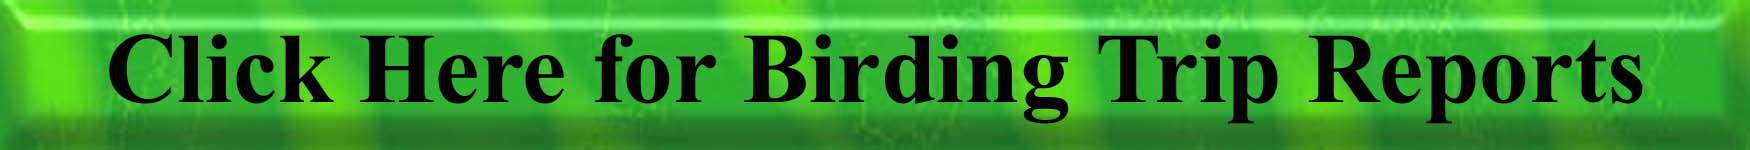 Click Here for the Birding Trip Reports